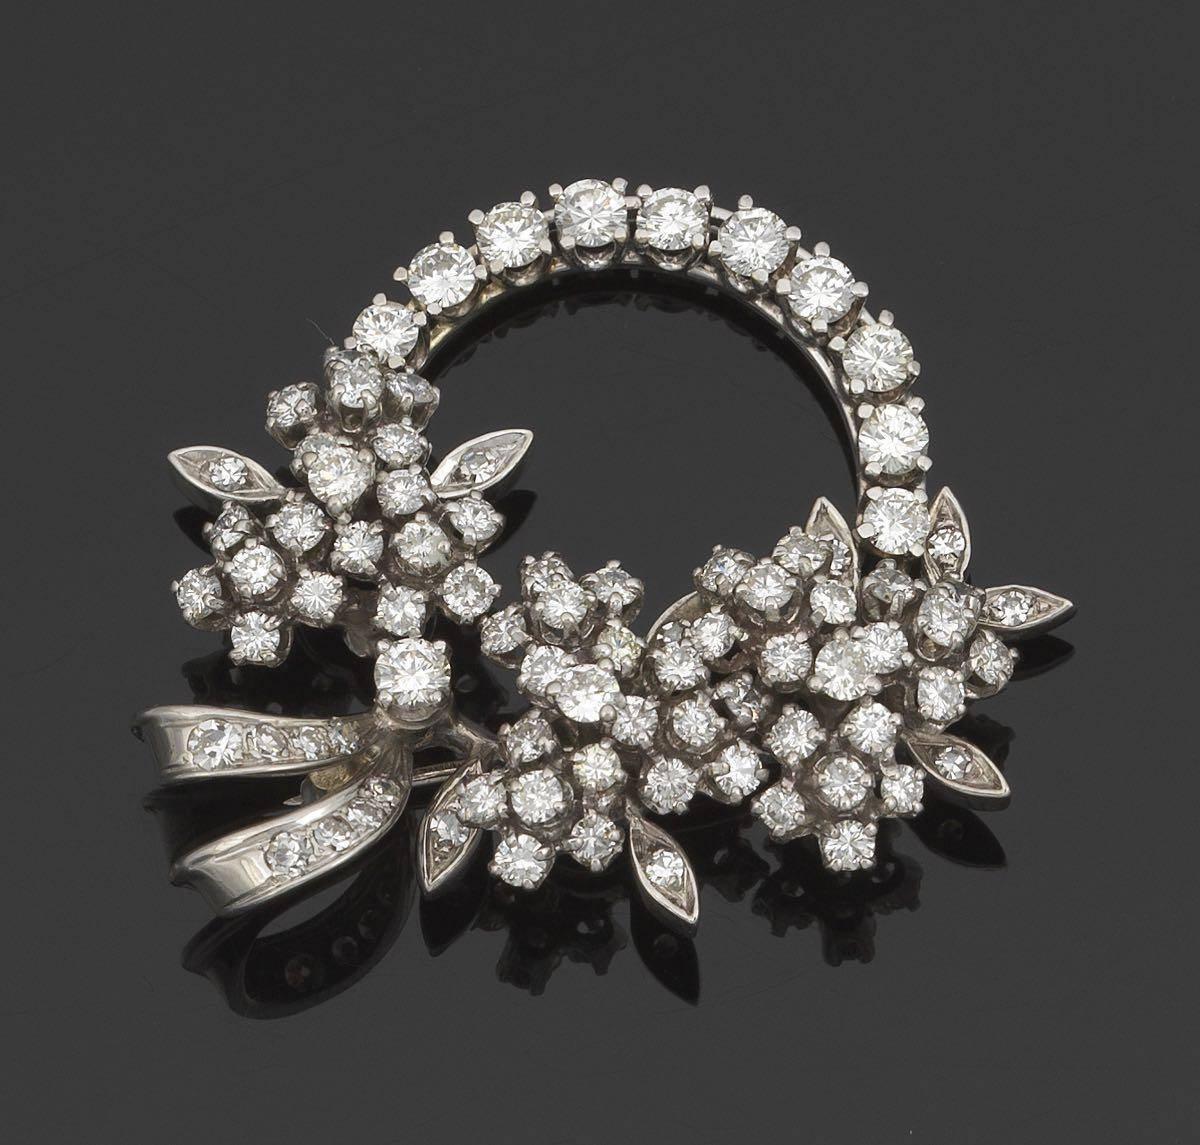 Art Deco 1940's 1950s 3.50 Carat Diamond Wreath Brooch Pendant In Excellent Condition For Sale In Shaker Heights, OH